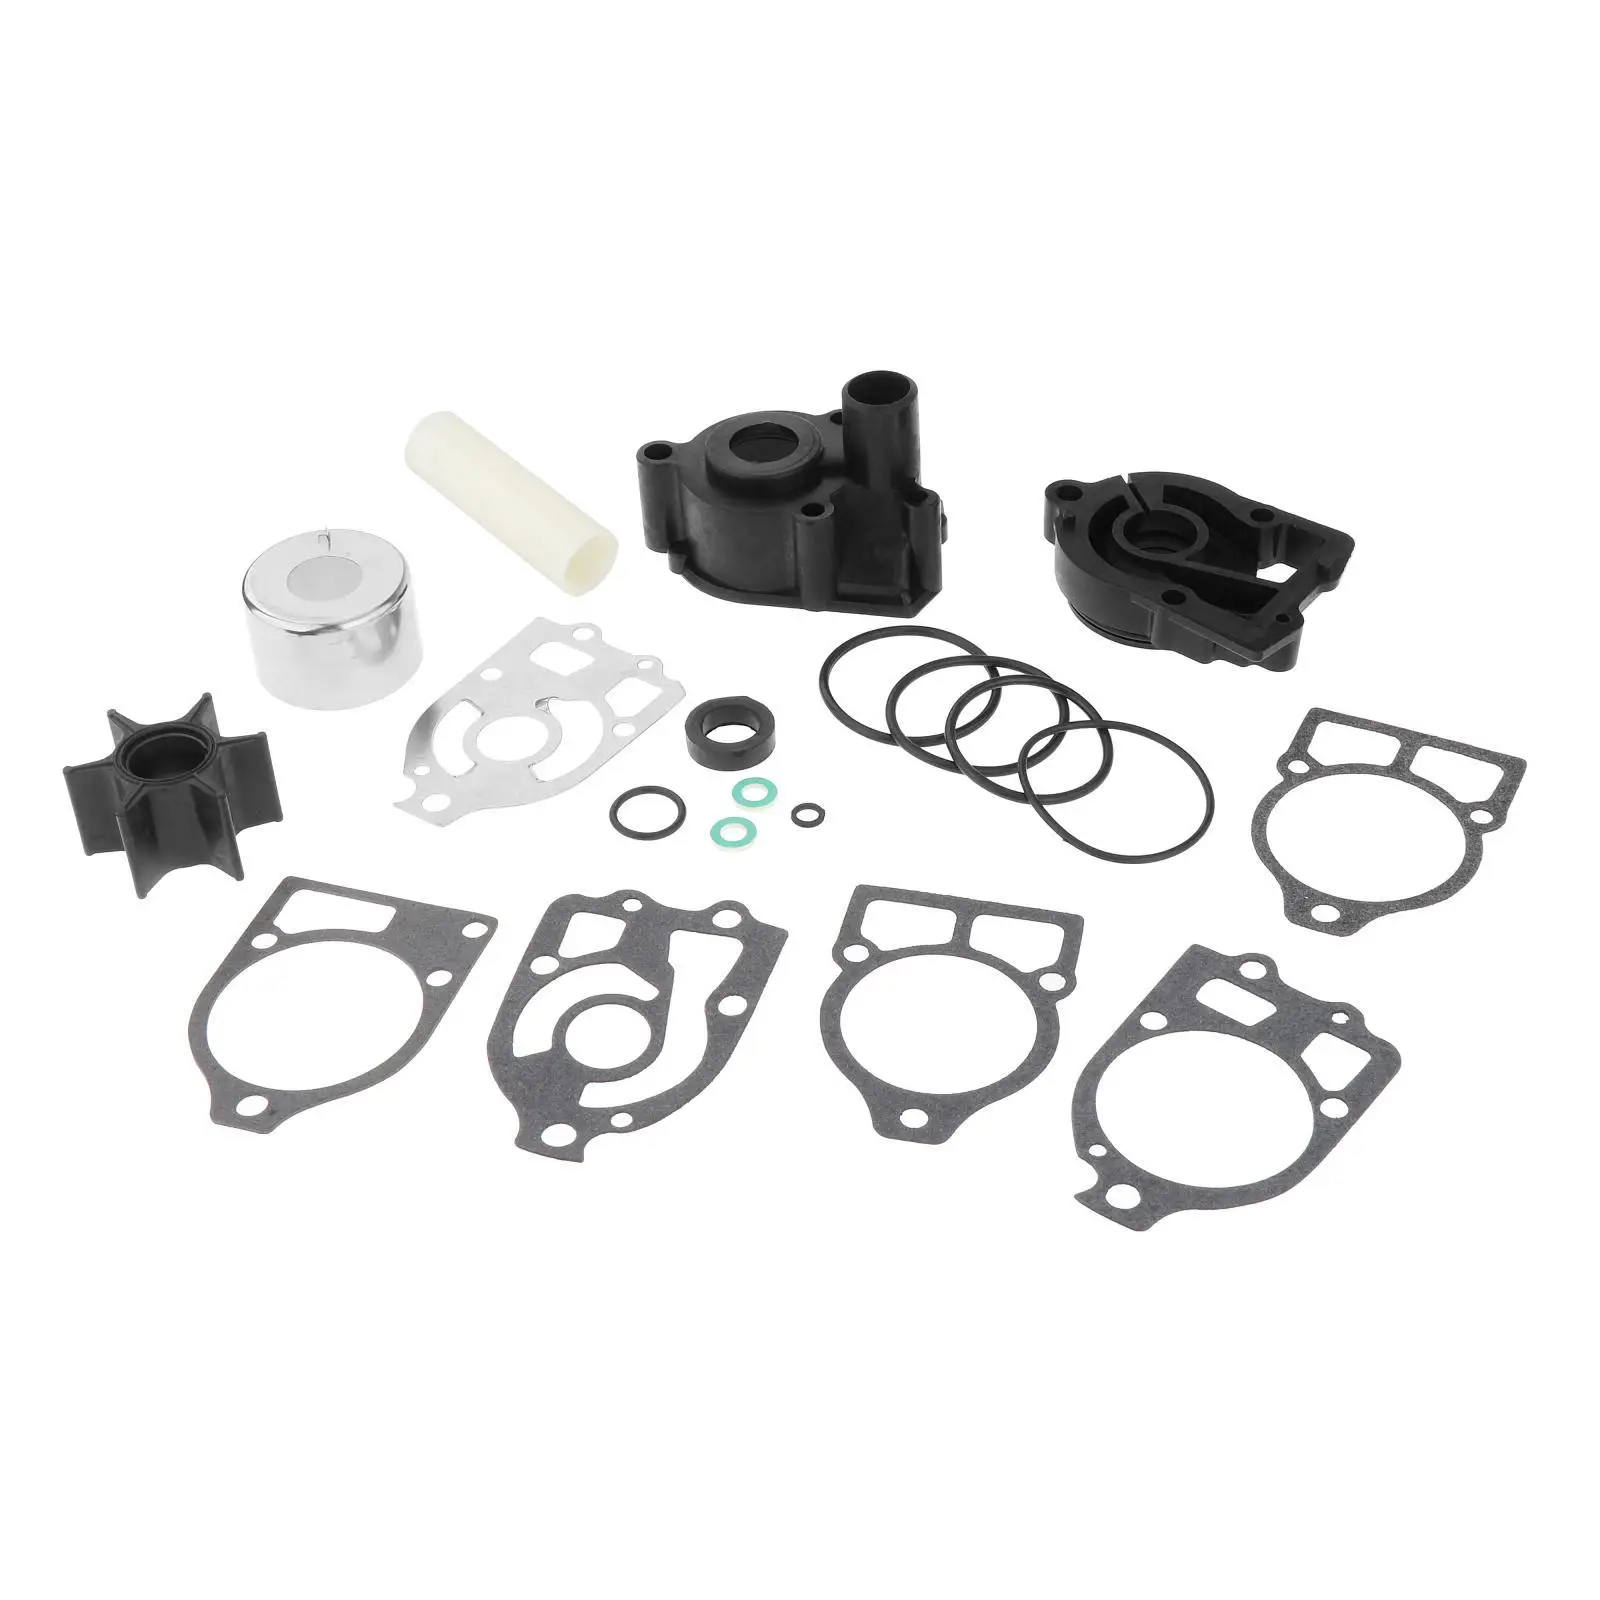 Water Pump Repair  for Easy to Install 46-96146A8 Accessories